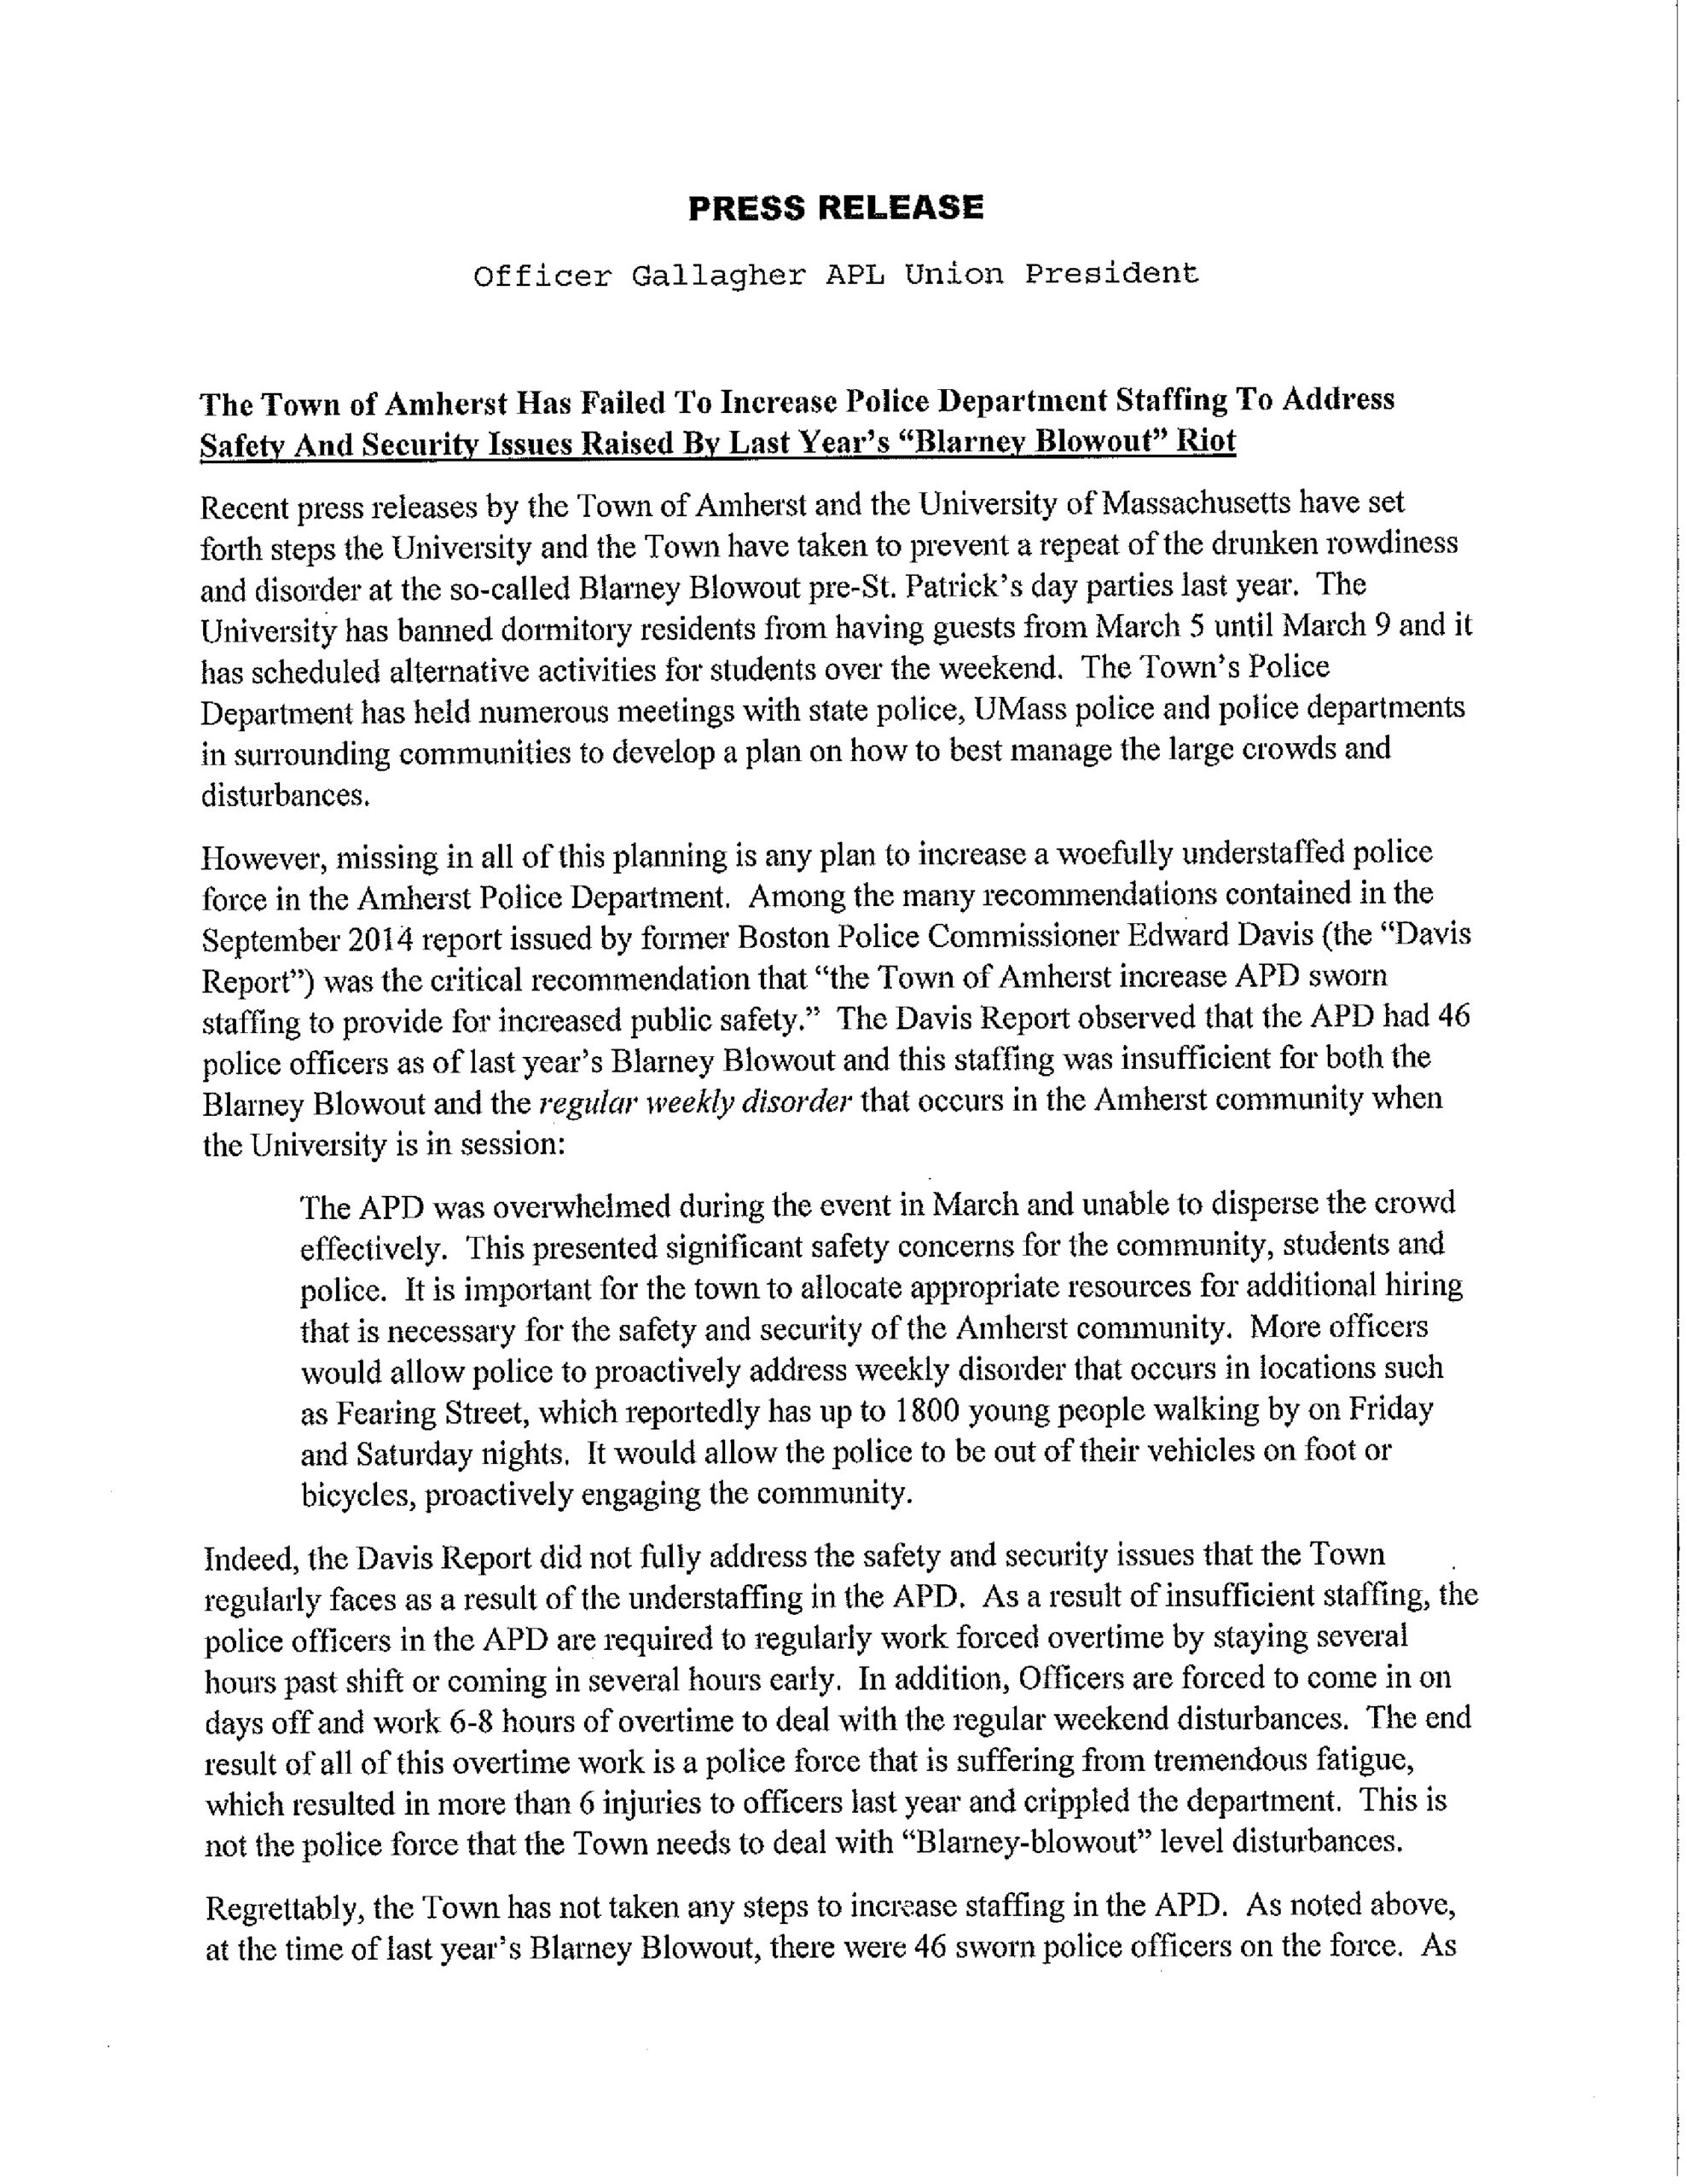 Amherst Press Release 02-15-page-1